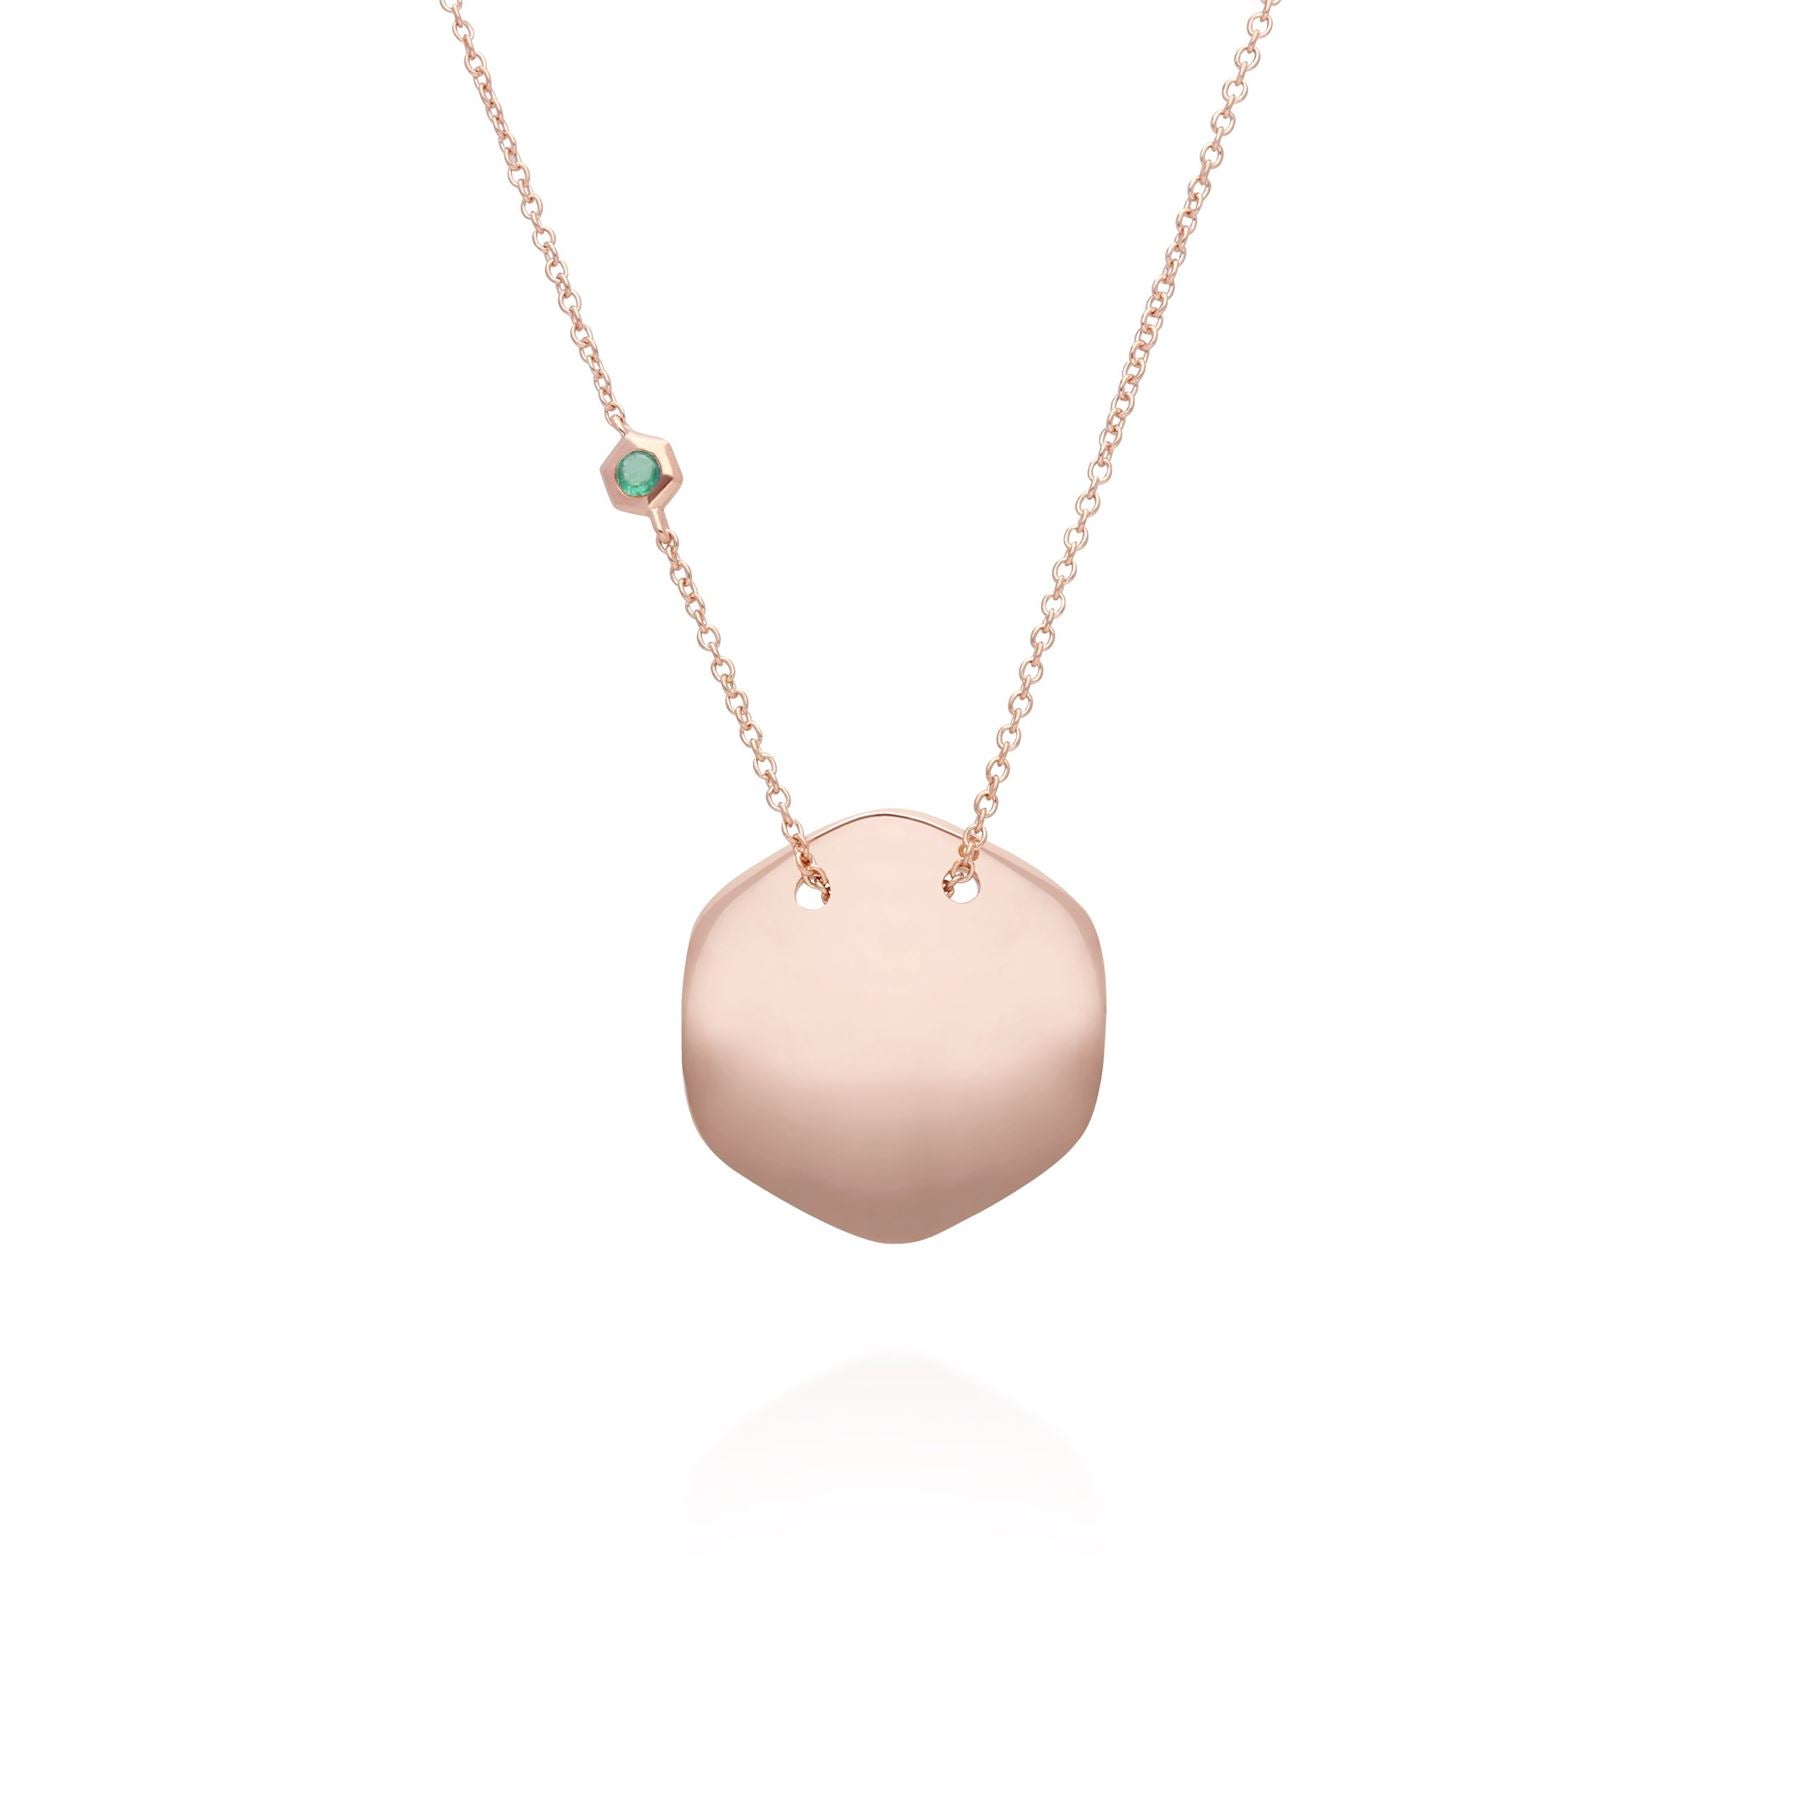 Emerald Engravable Necklace in Rose Gold Plated Sterling Silver